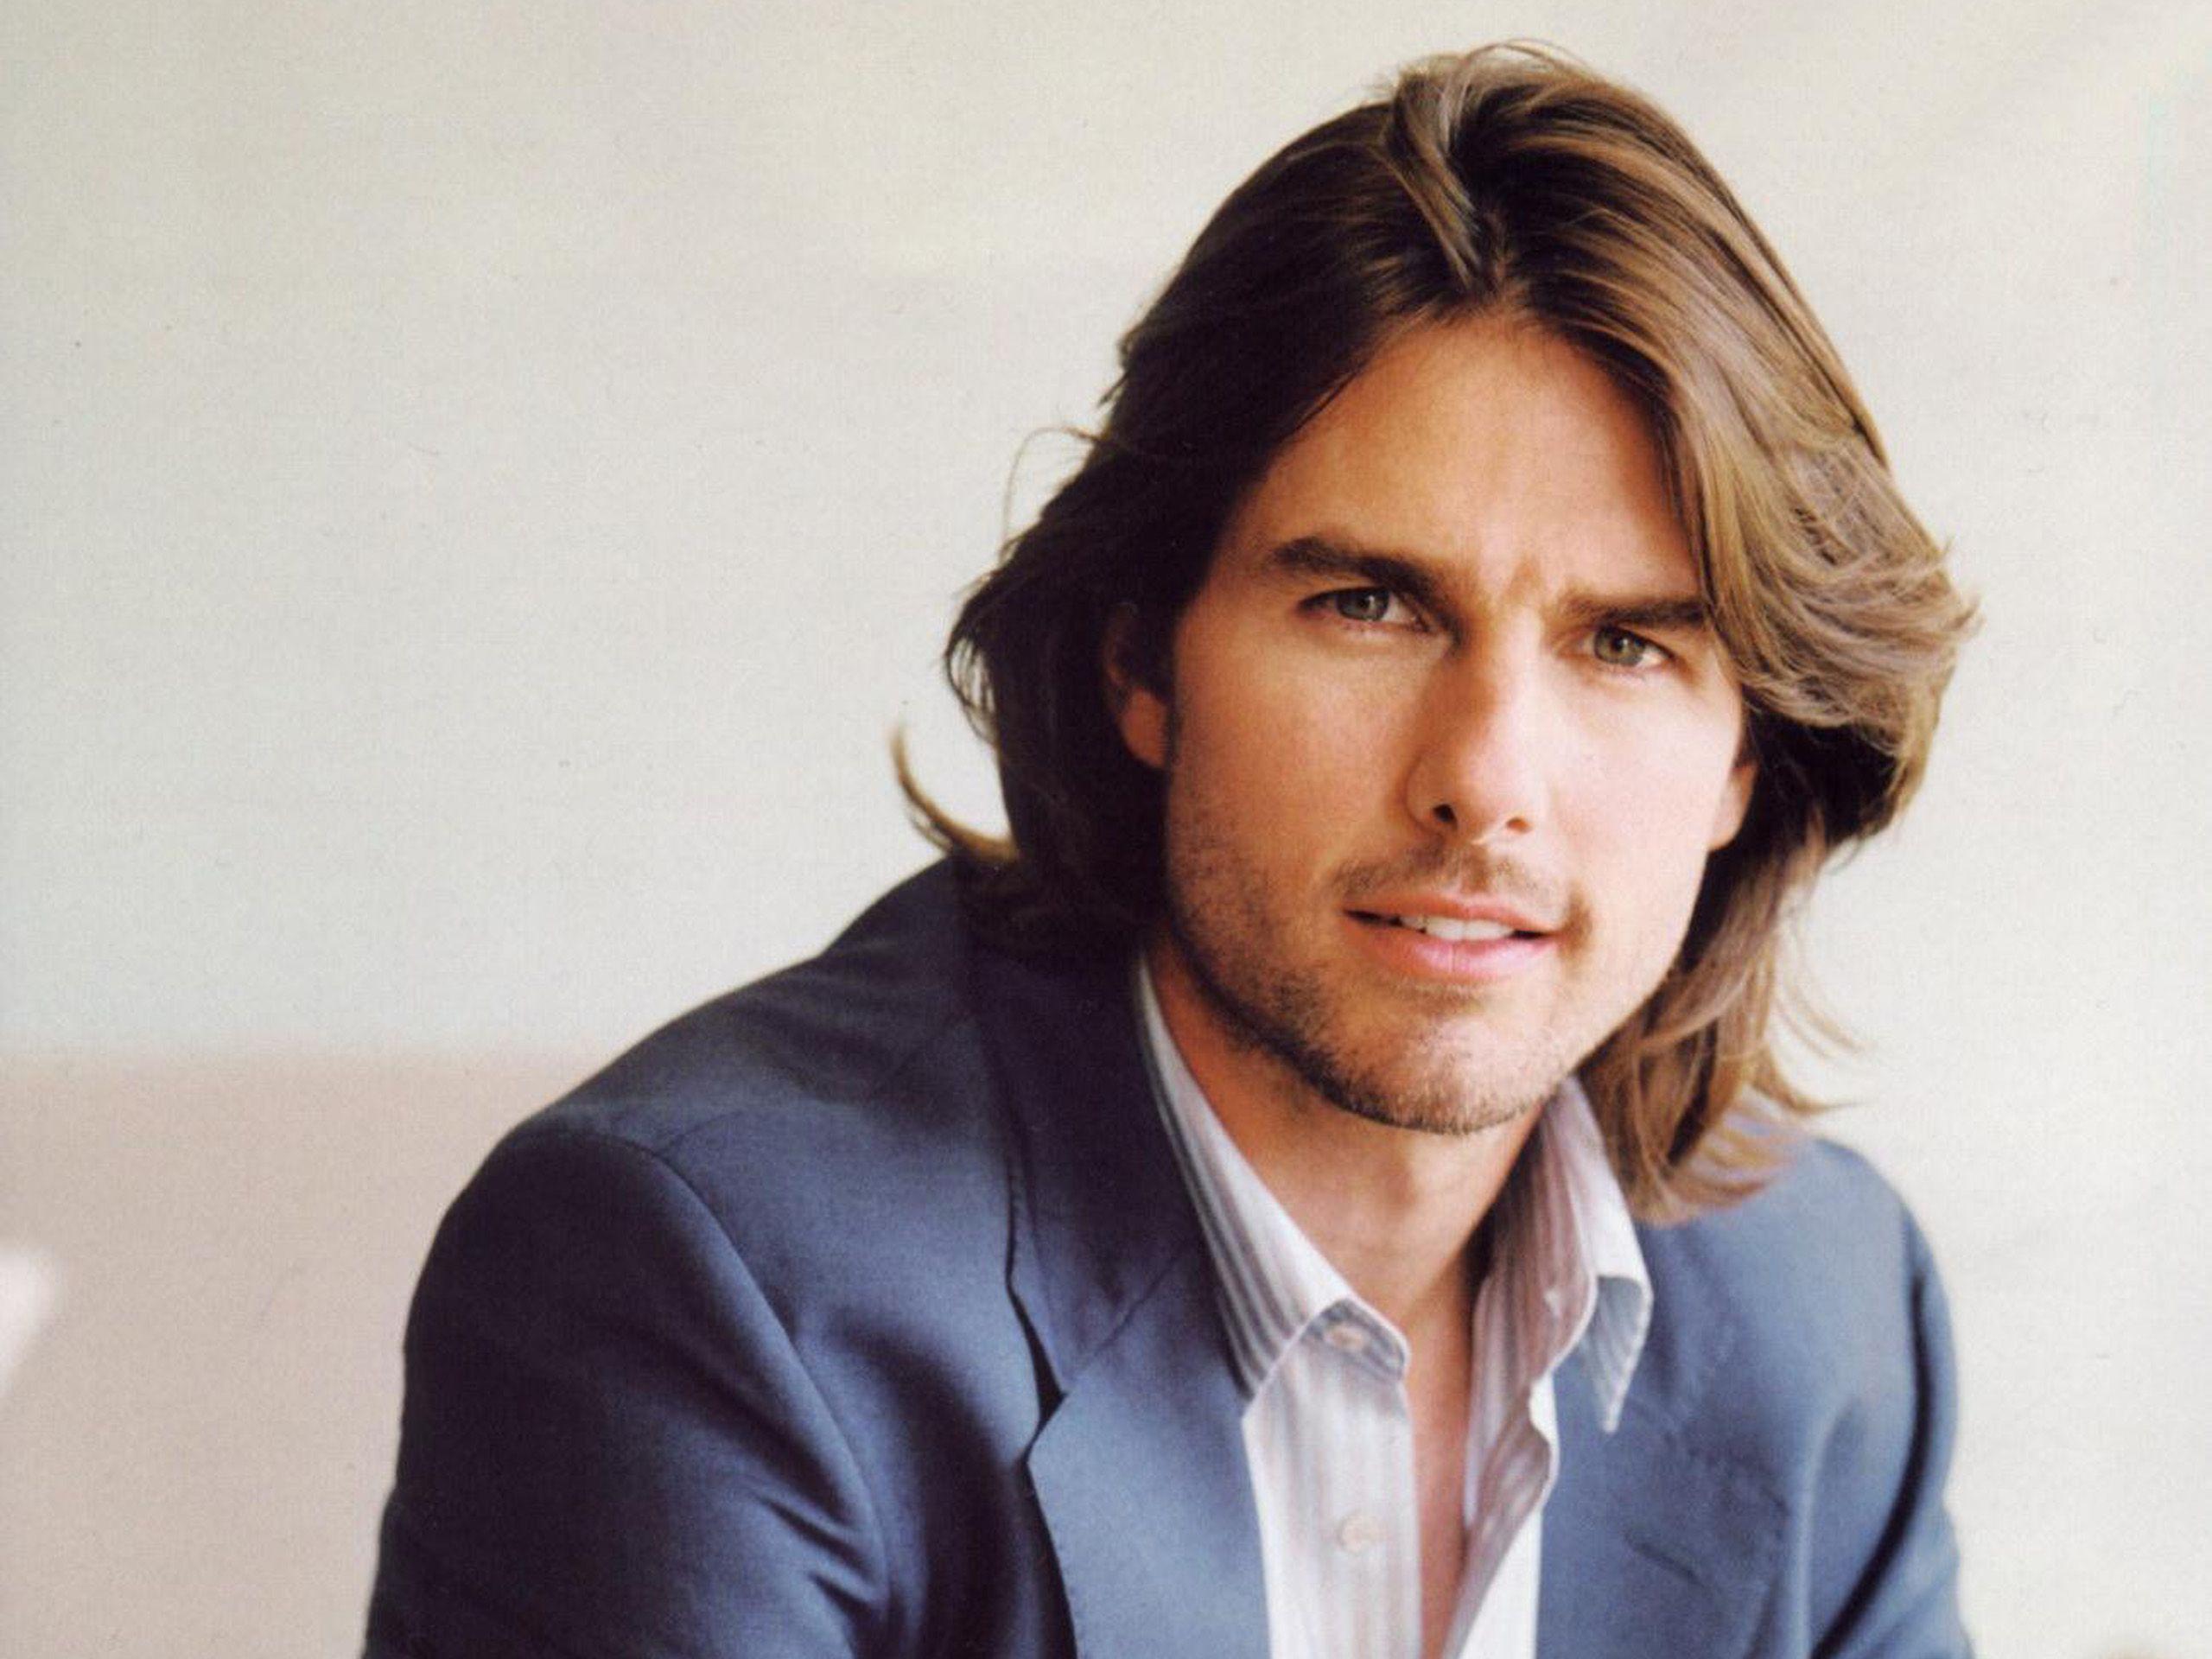 Young Tom Cruise. Free Desktop Wallpaper for Widescreen, HD and Mobile